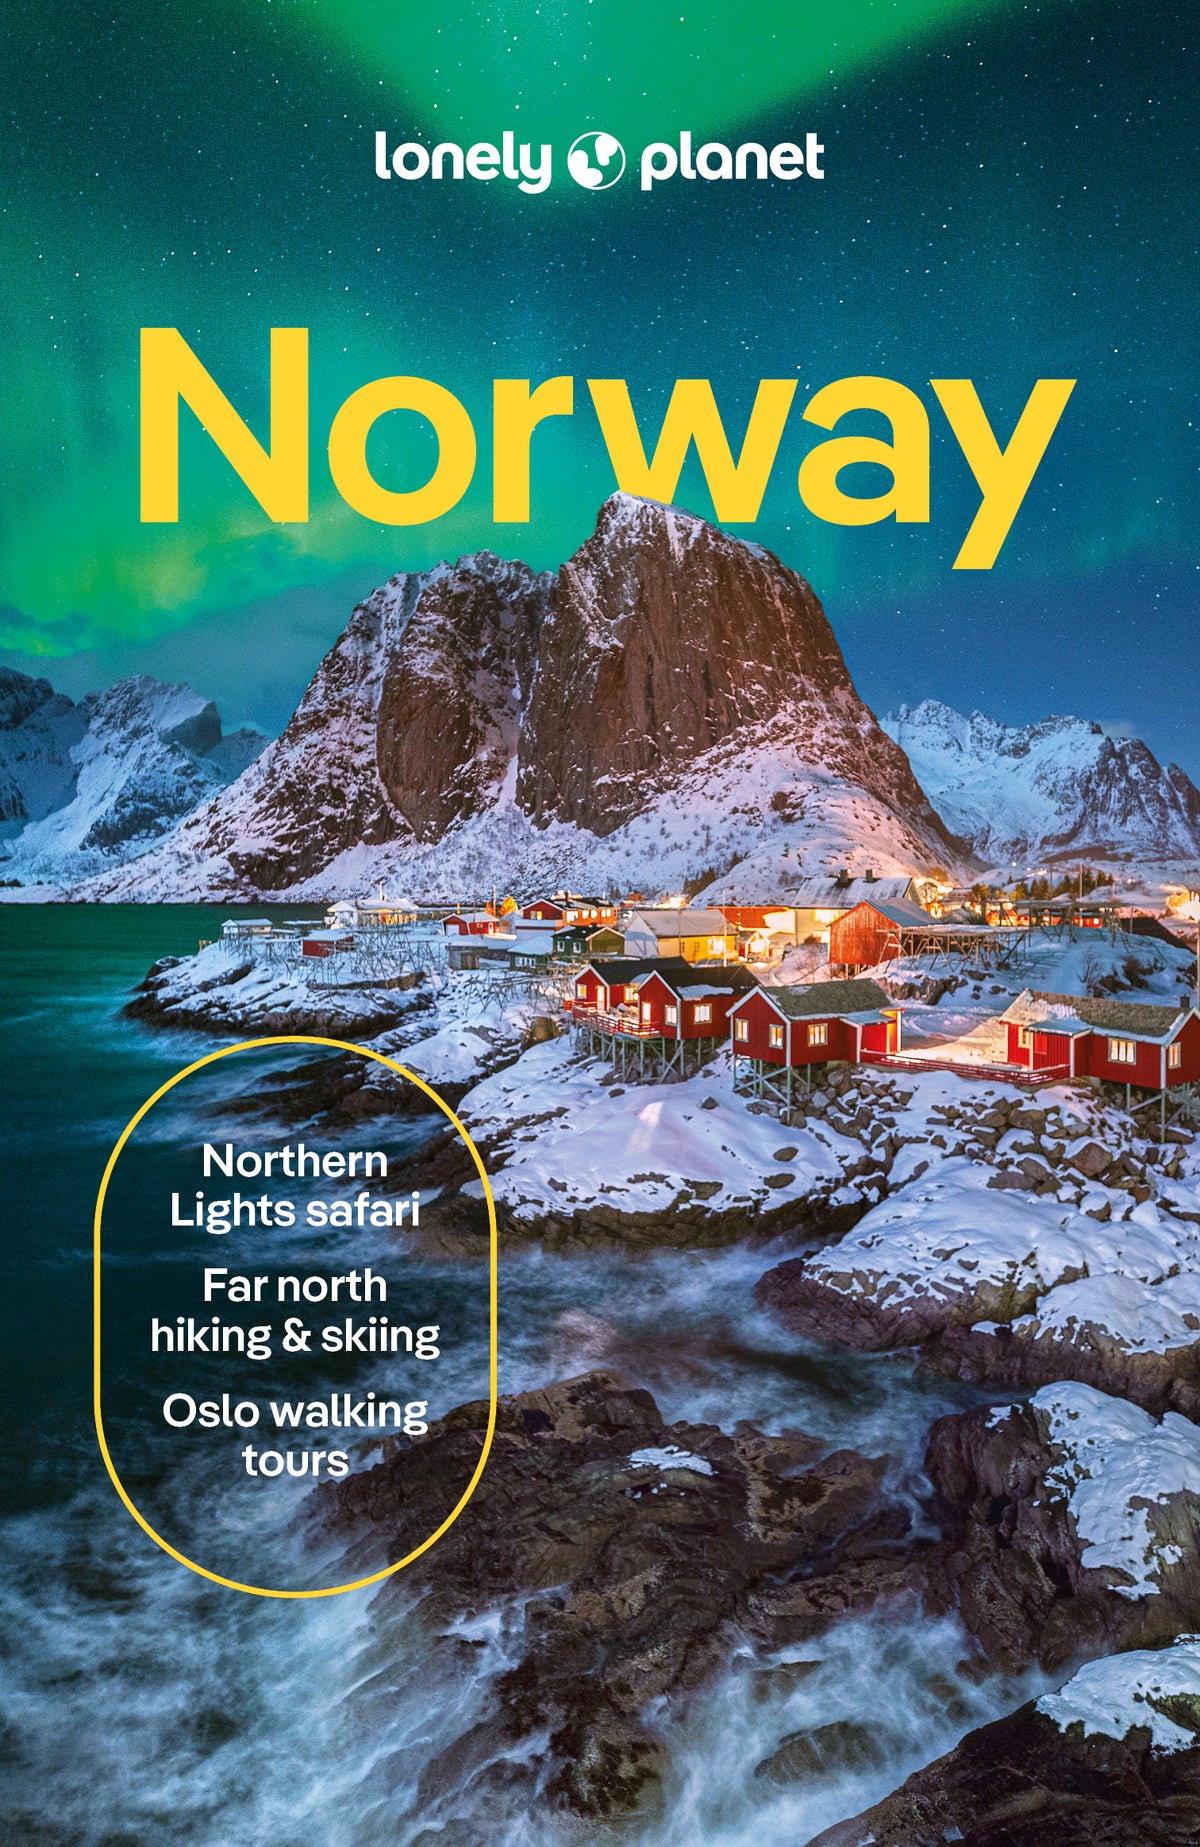 Norway Travel Guide